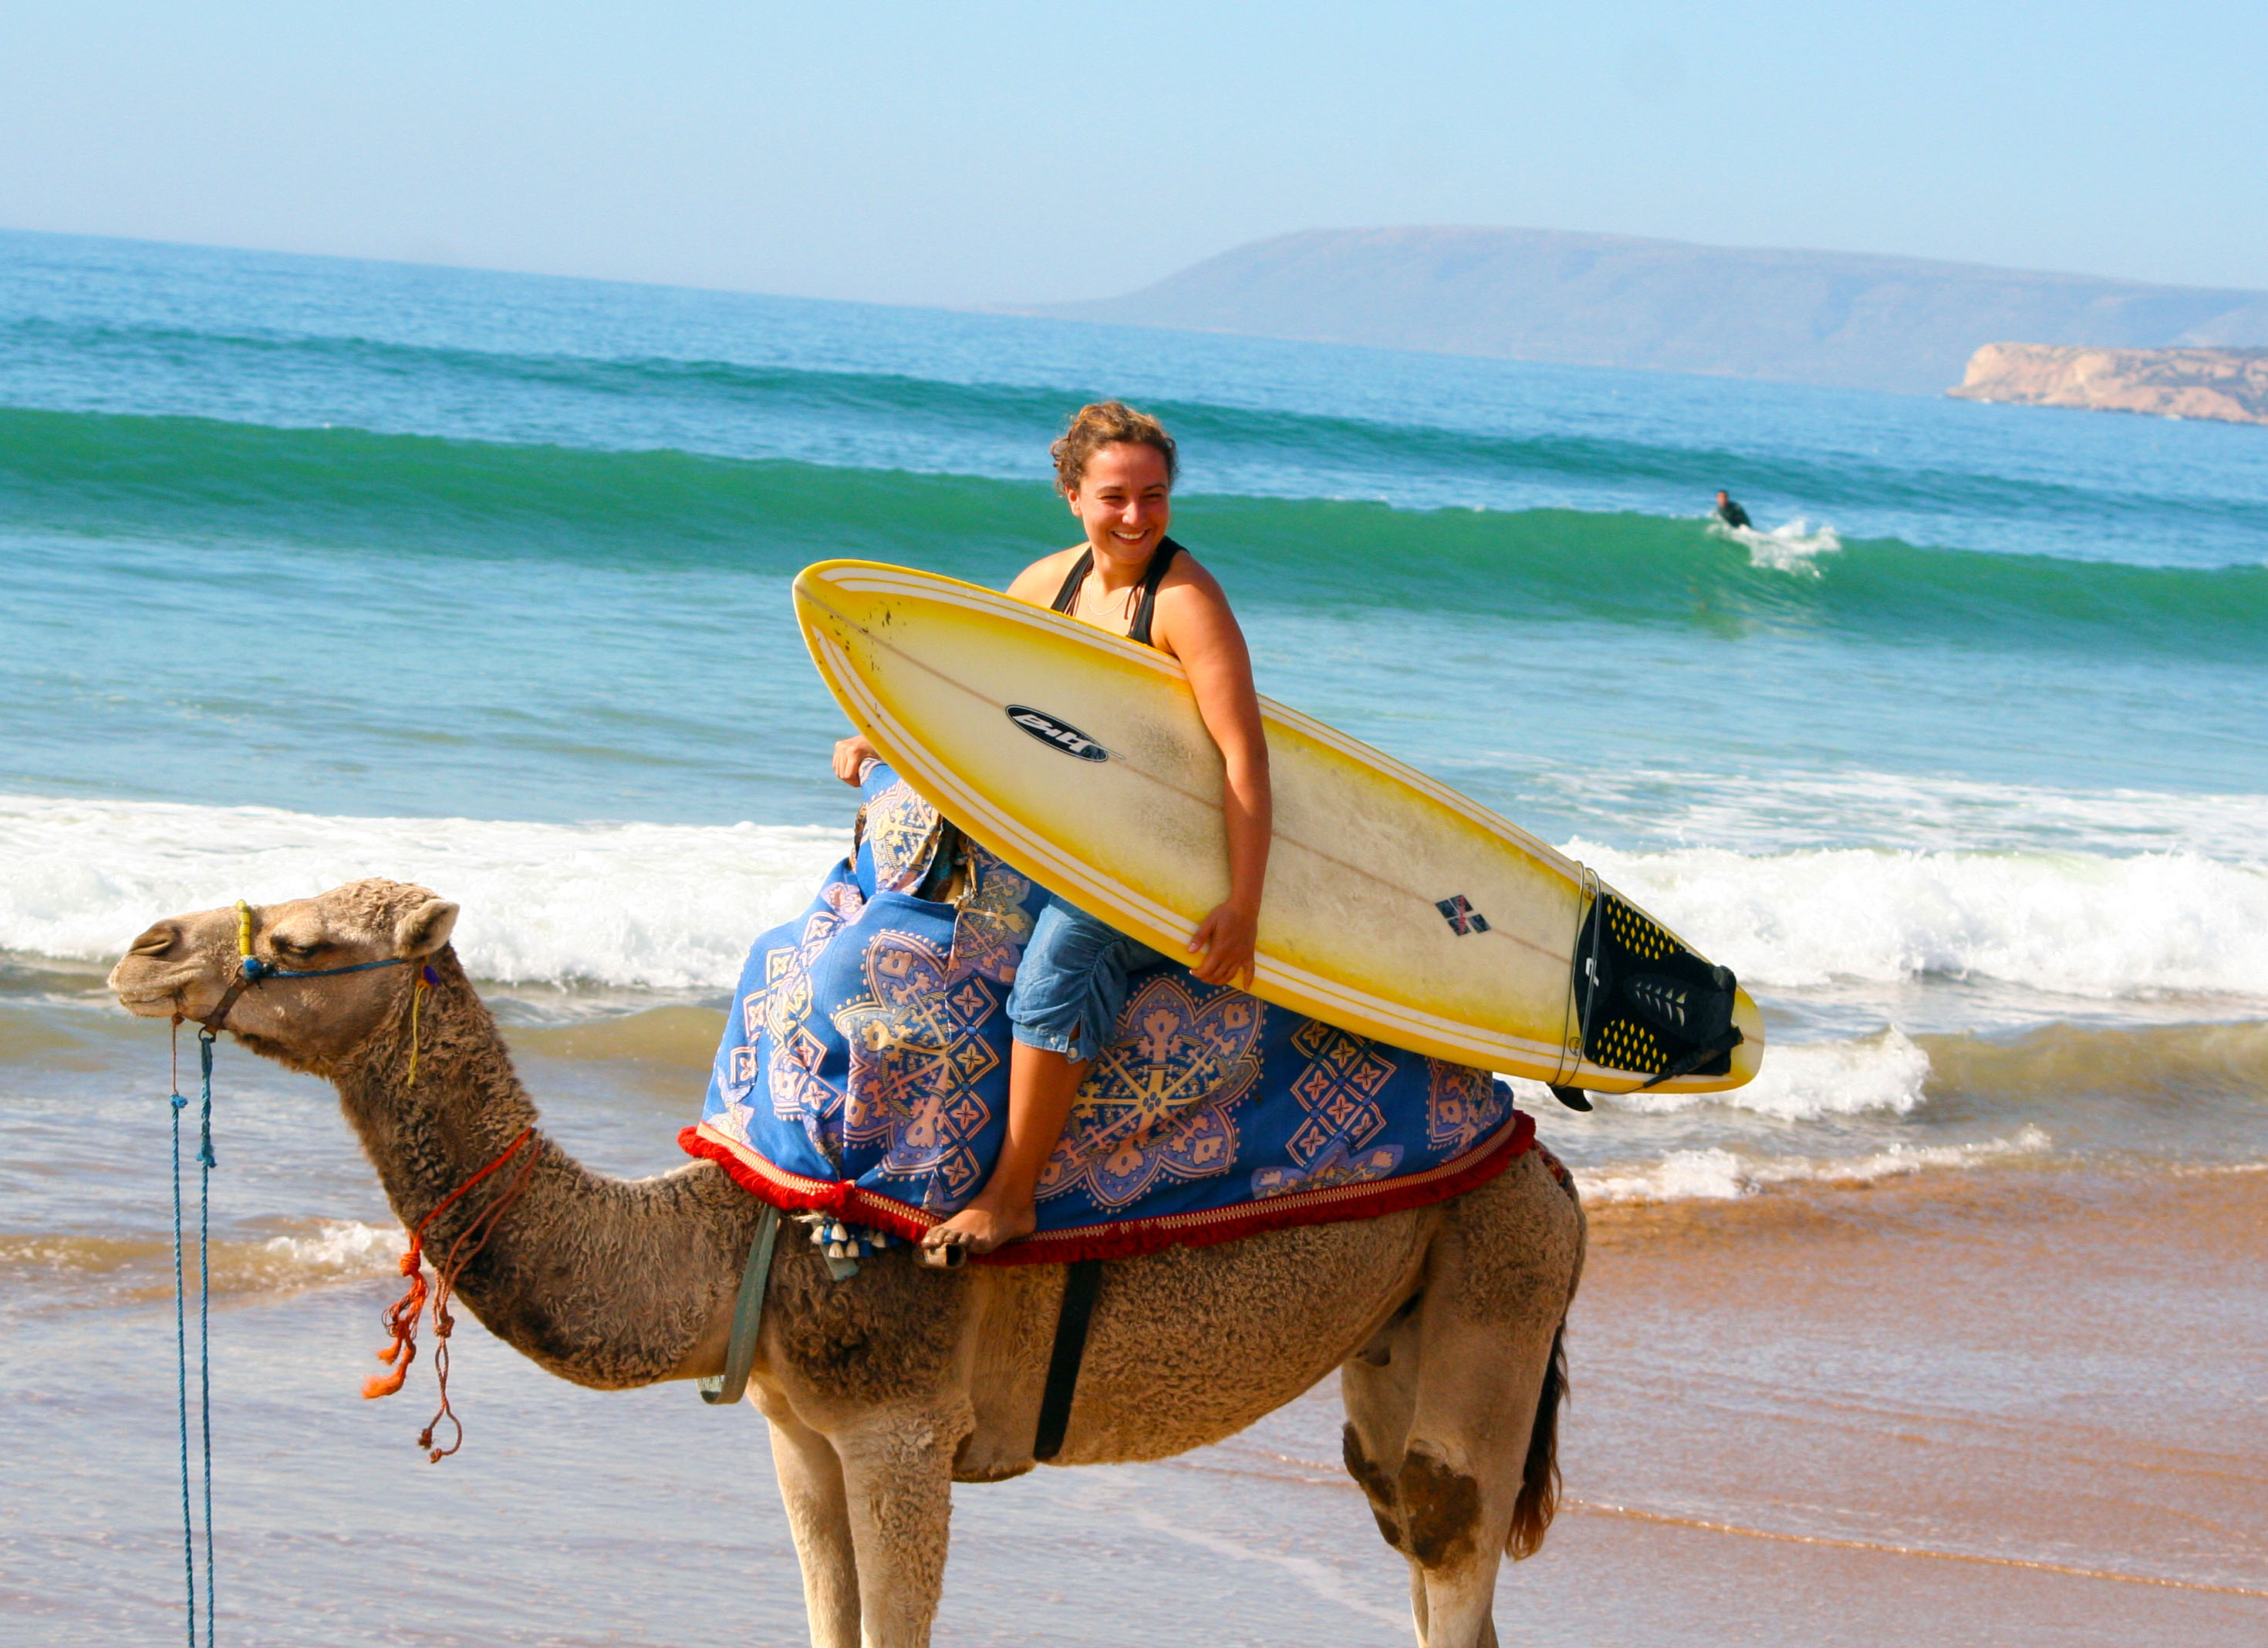 camel-ride-and-surfing-morocco_0_1